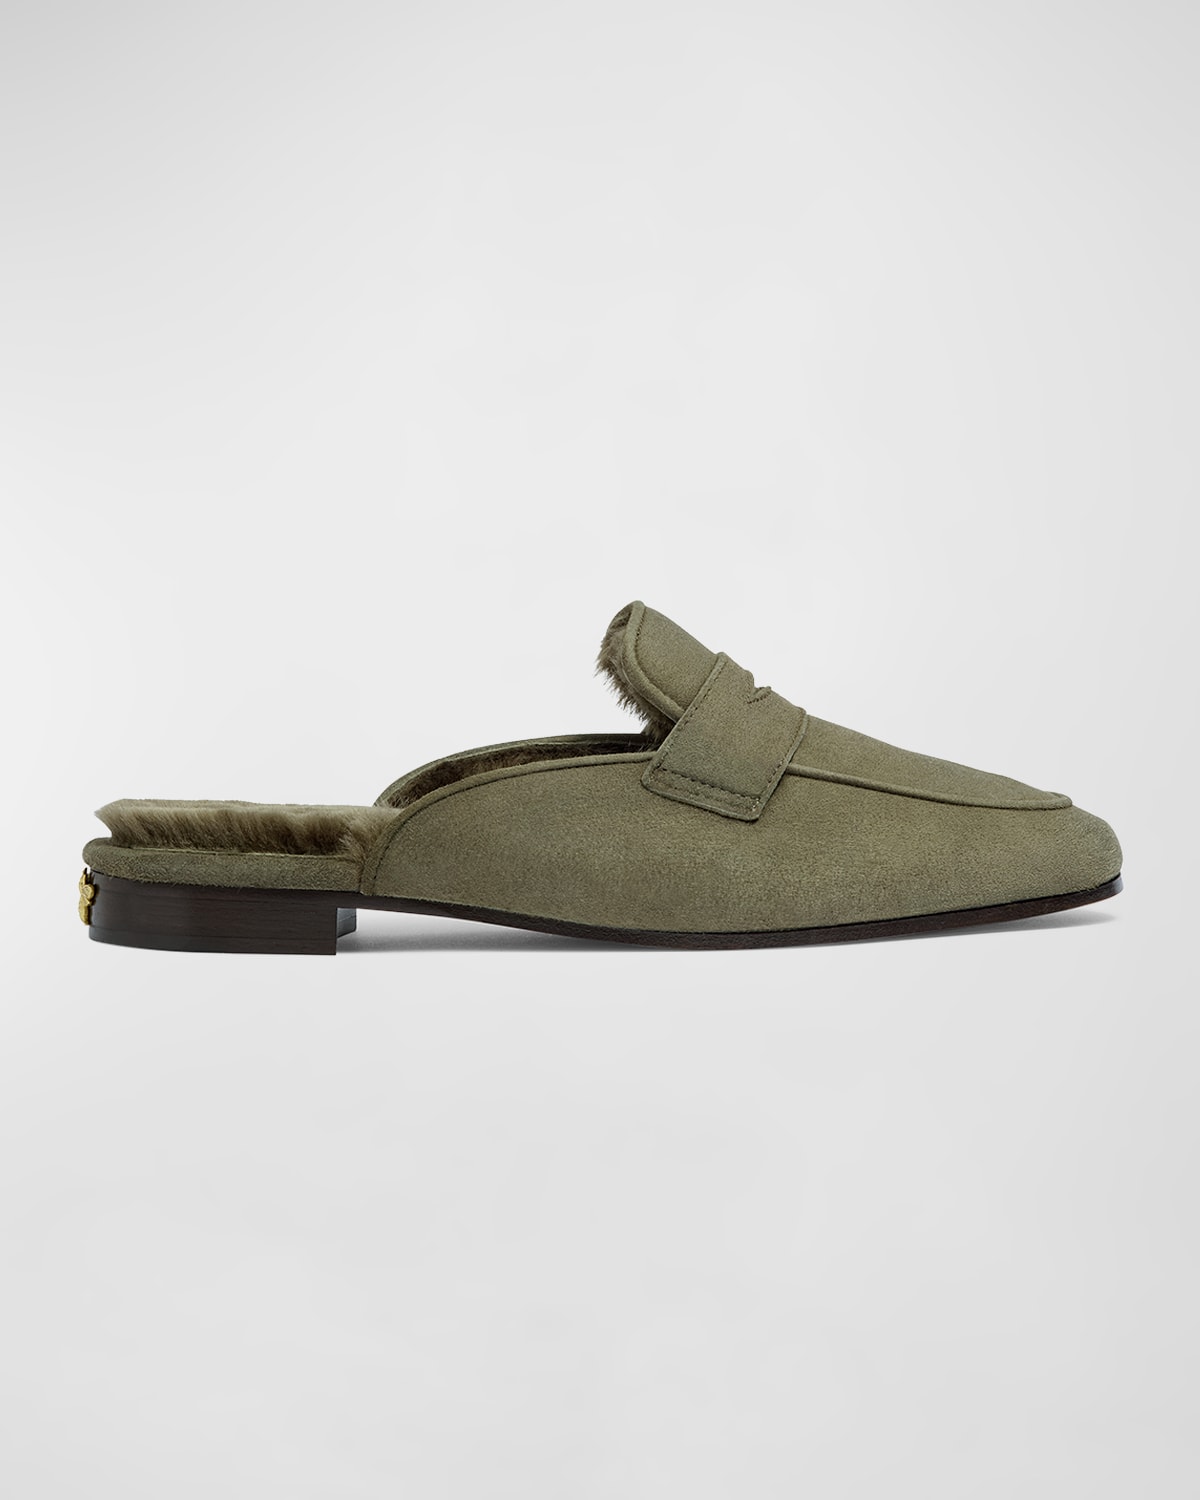 Bougeotte Suede Shearling Penny Loafer Mules